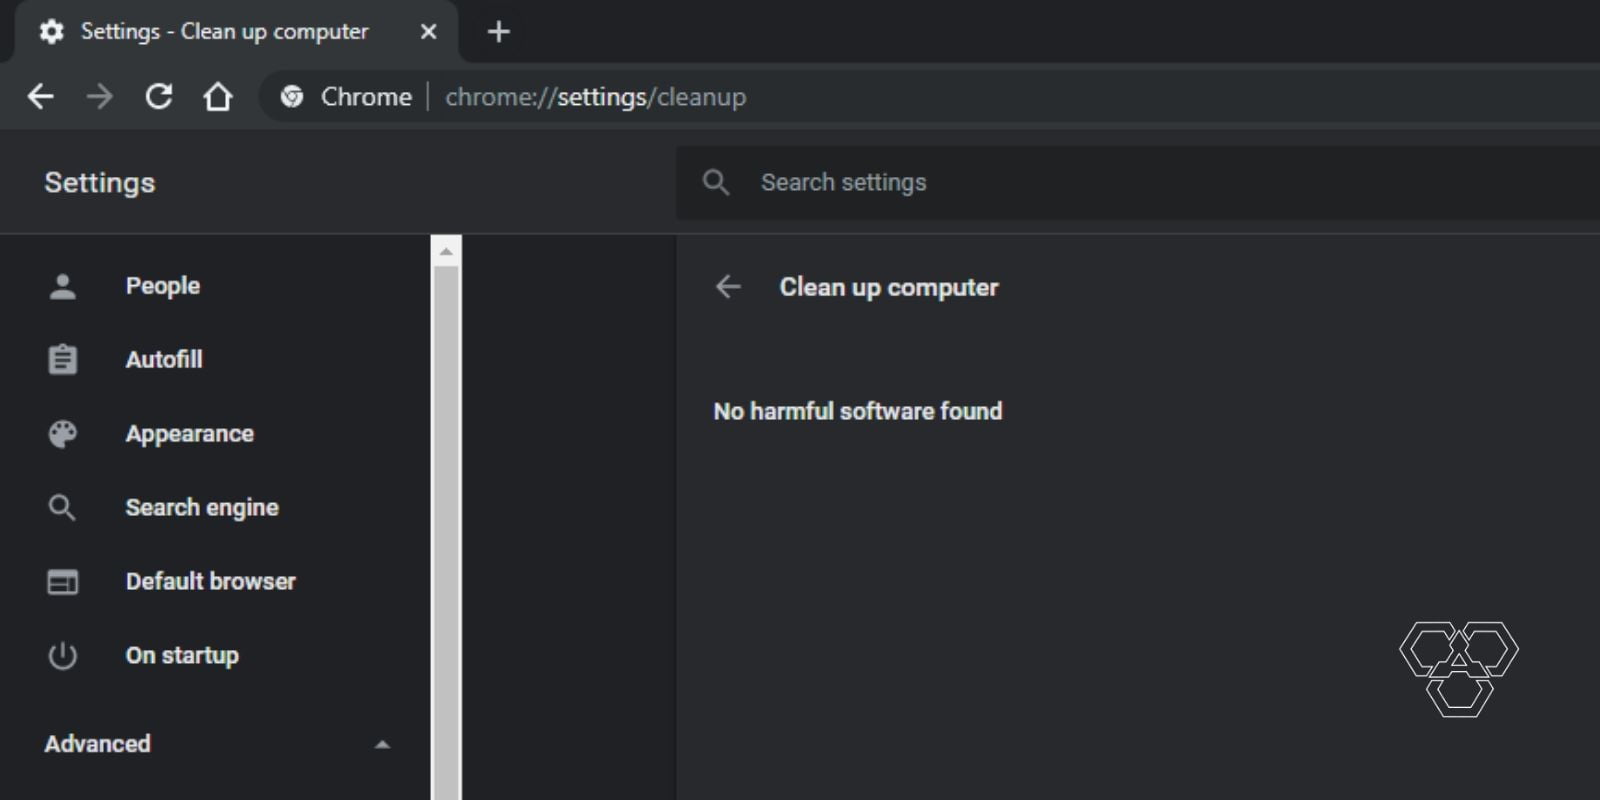 clean up computer using chrome cleanup tool